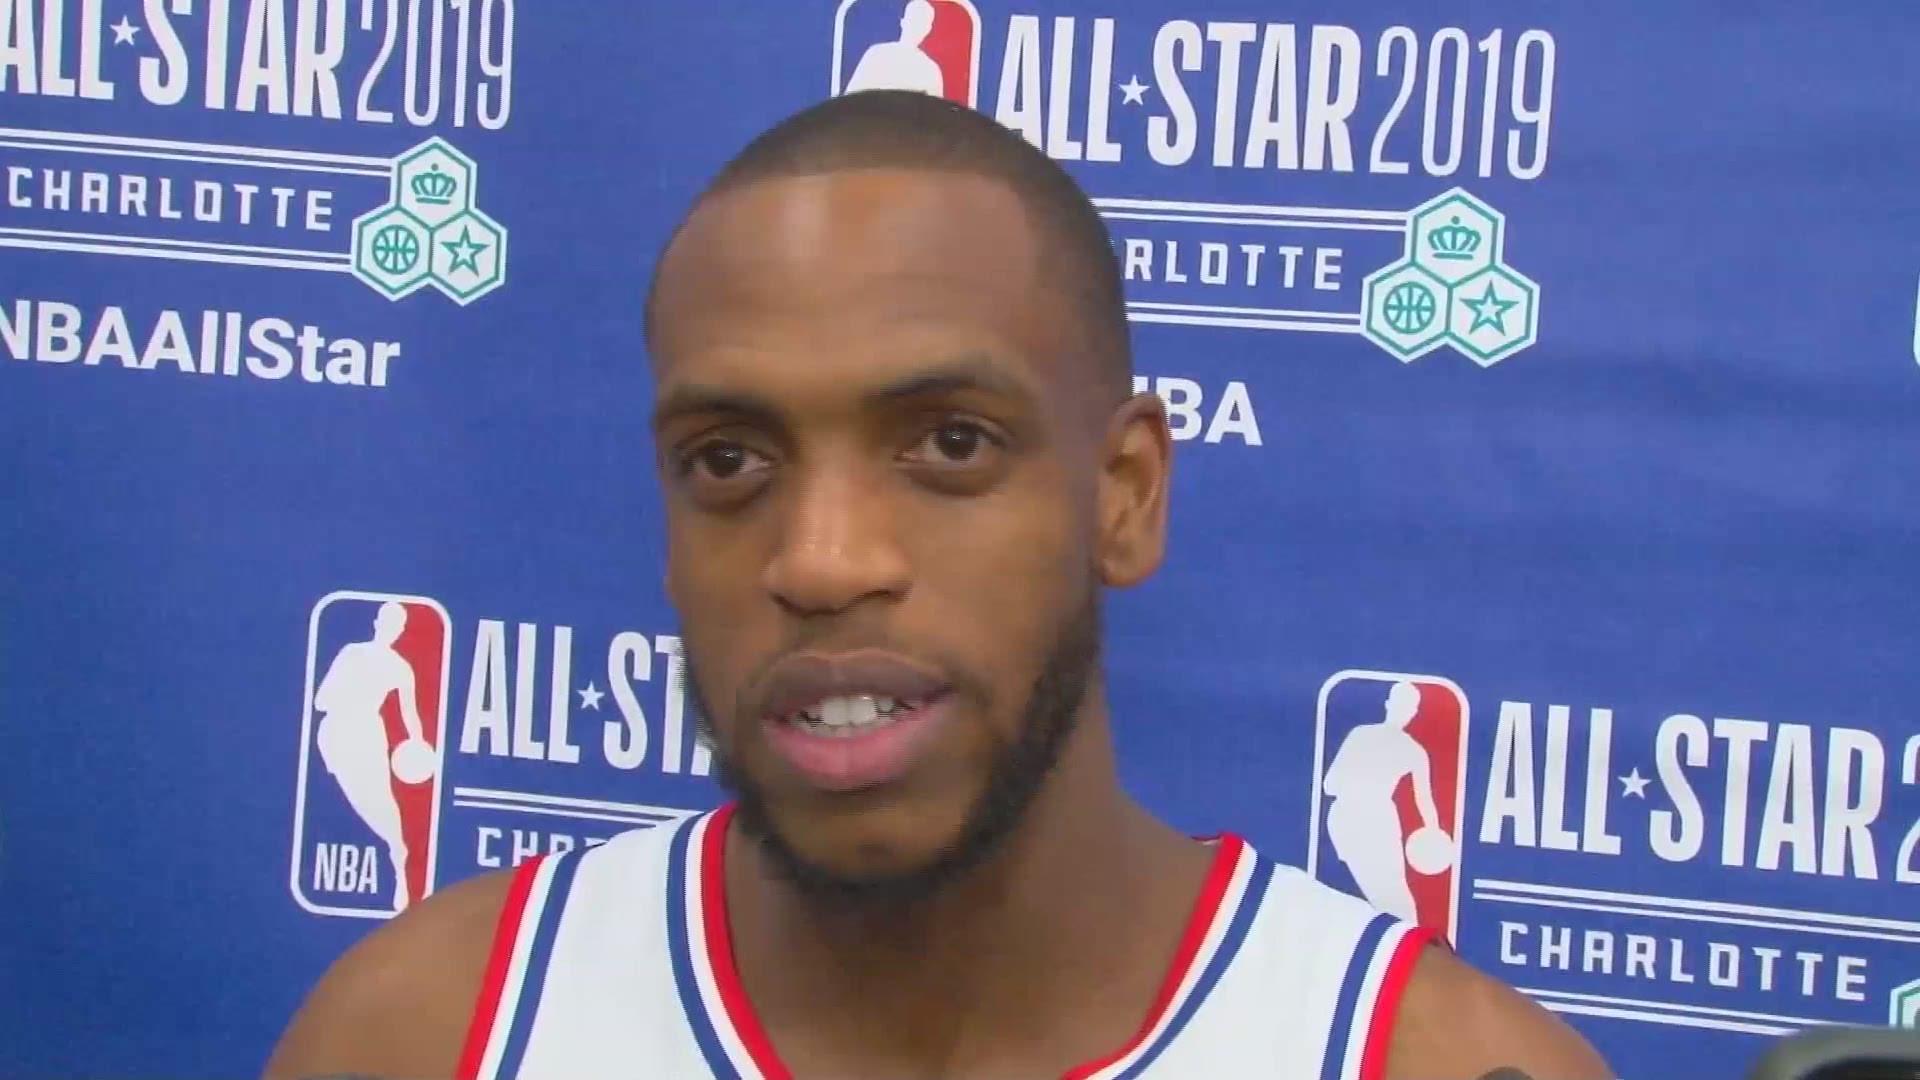 Porter-Gaud grad and Milwaukee Bucks forward Khris Middleton played in his first career NBA All-Star Game in Charlotte. The Charleston native talks about his experience and how it felt to represent the state of South Carolina in one of the biggest sports events of the year.